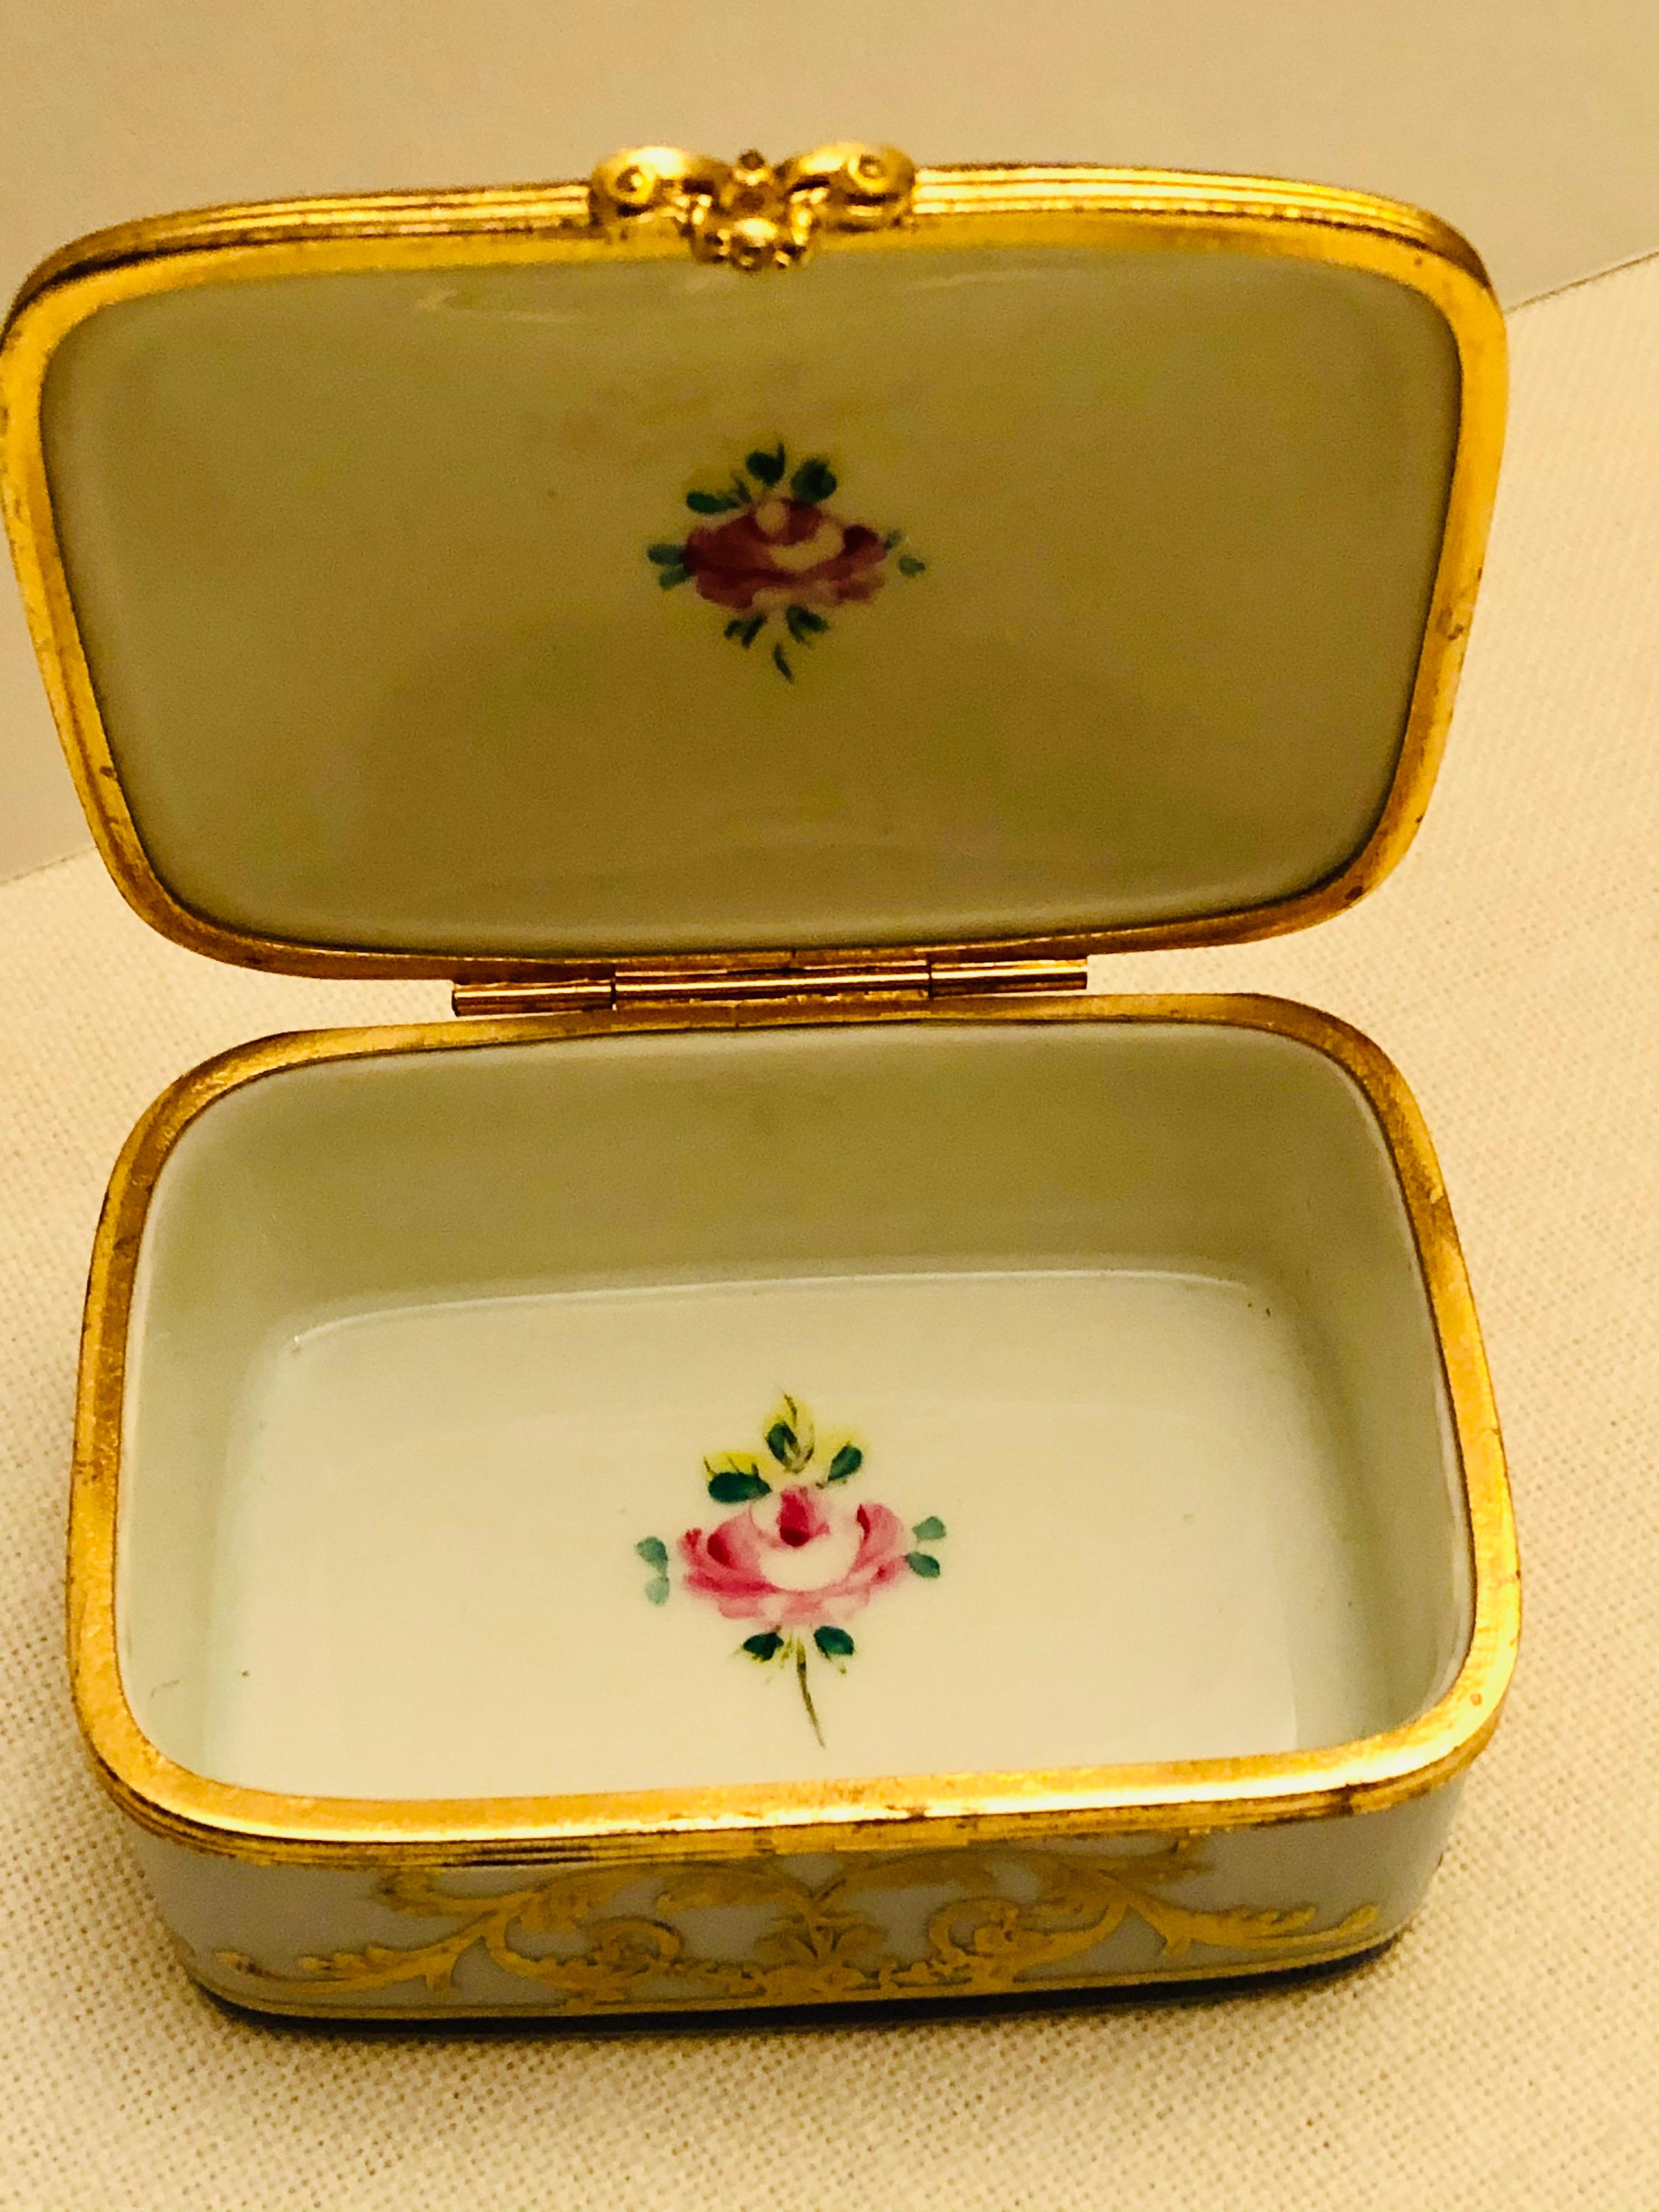 Le Tallec Porcelain Box with Decorated with Flower Bouquets and Raised Gilding 2